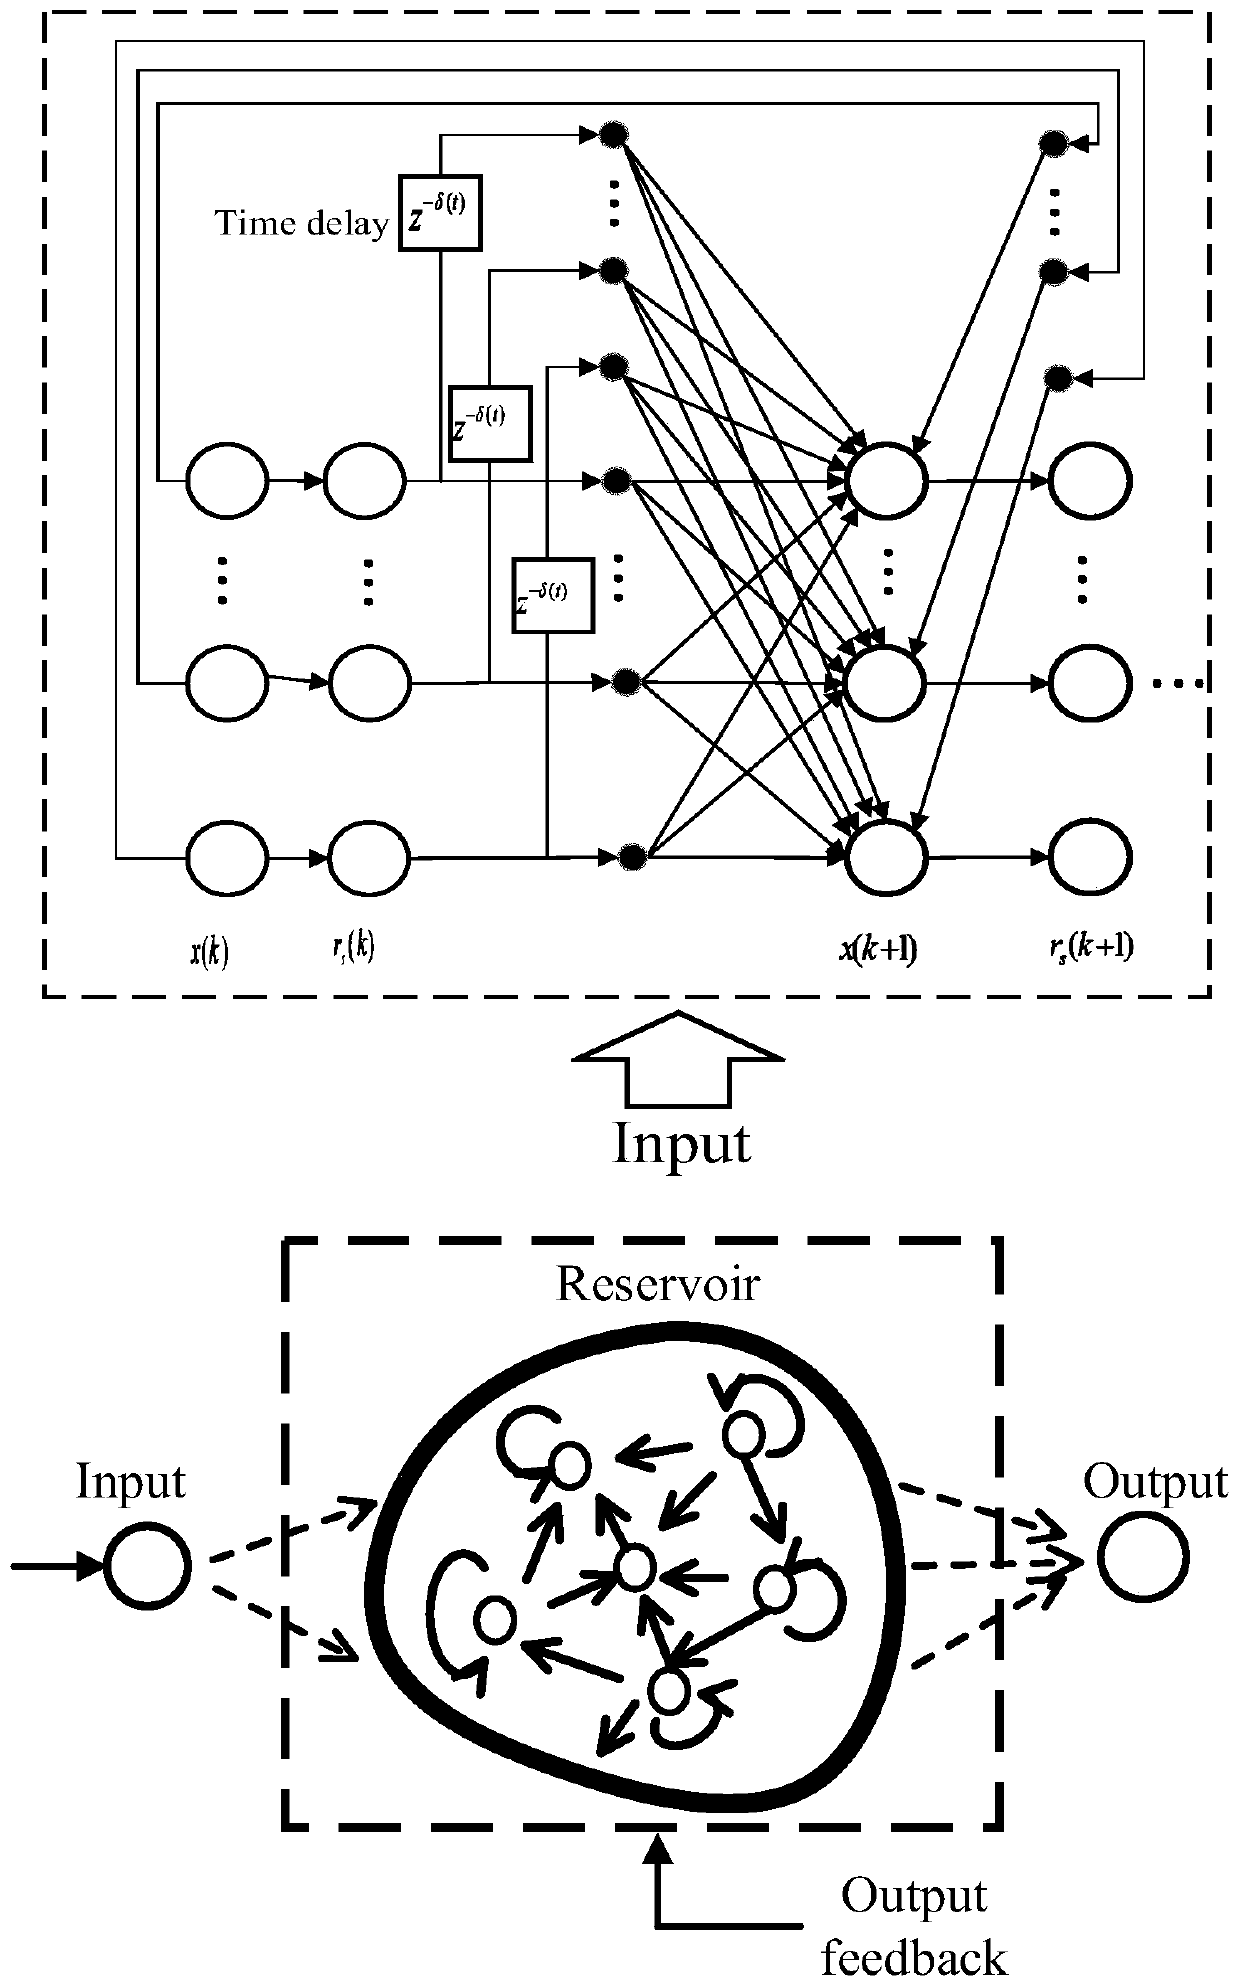 Robot self-adaptive impedance control method based on biological heuristic neural network